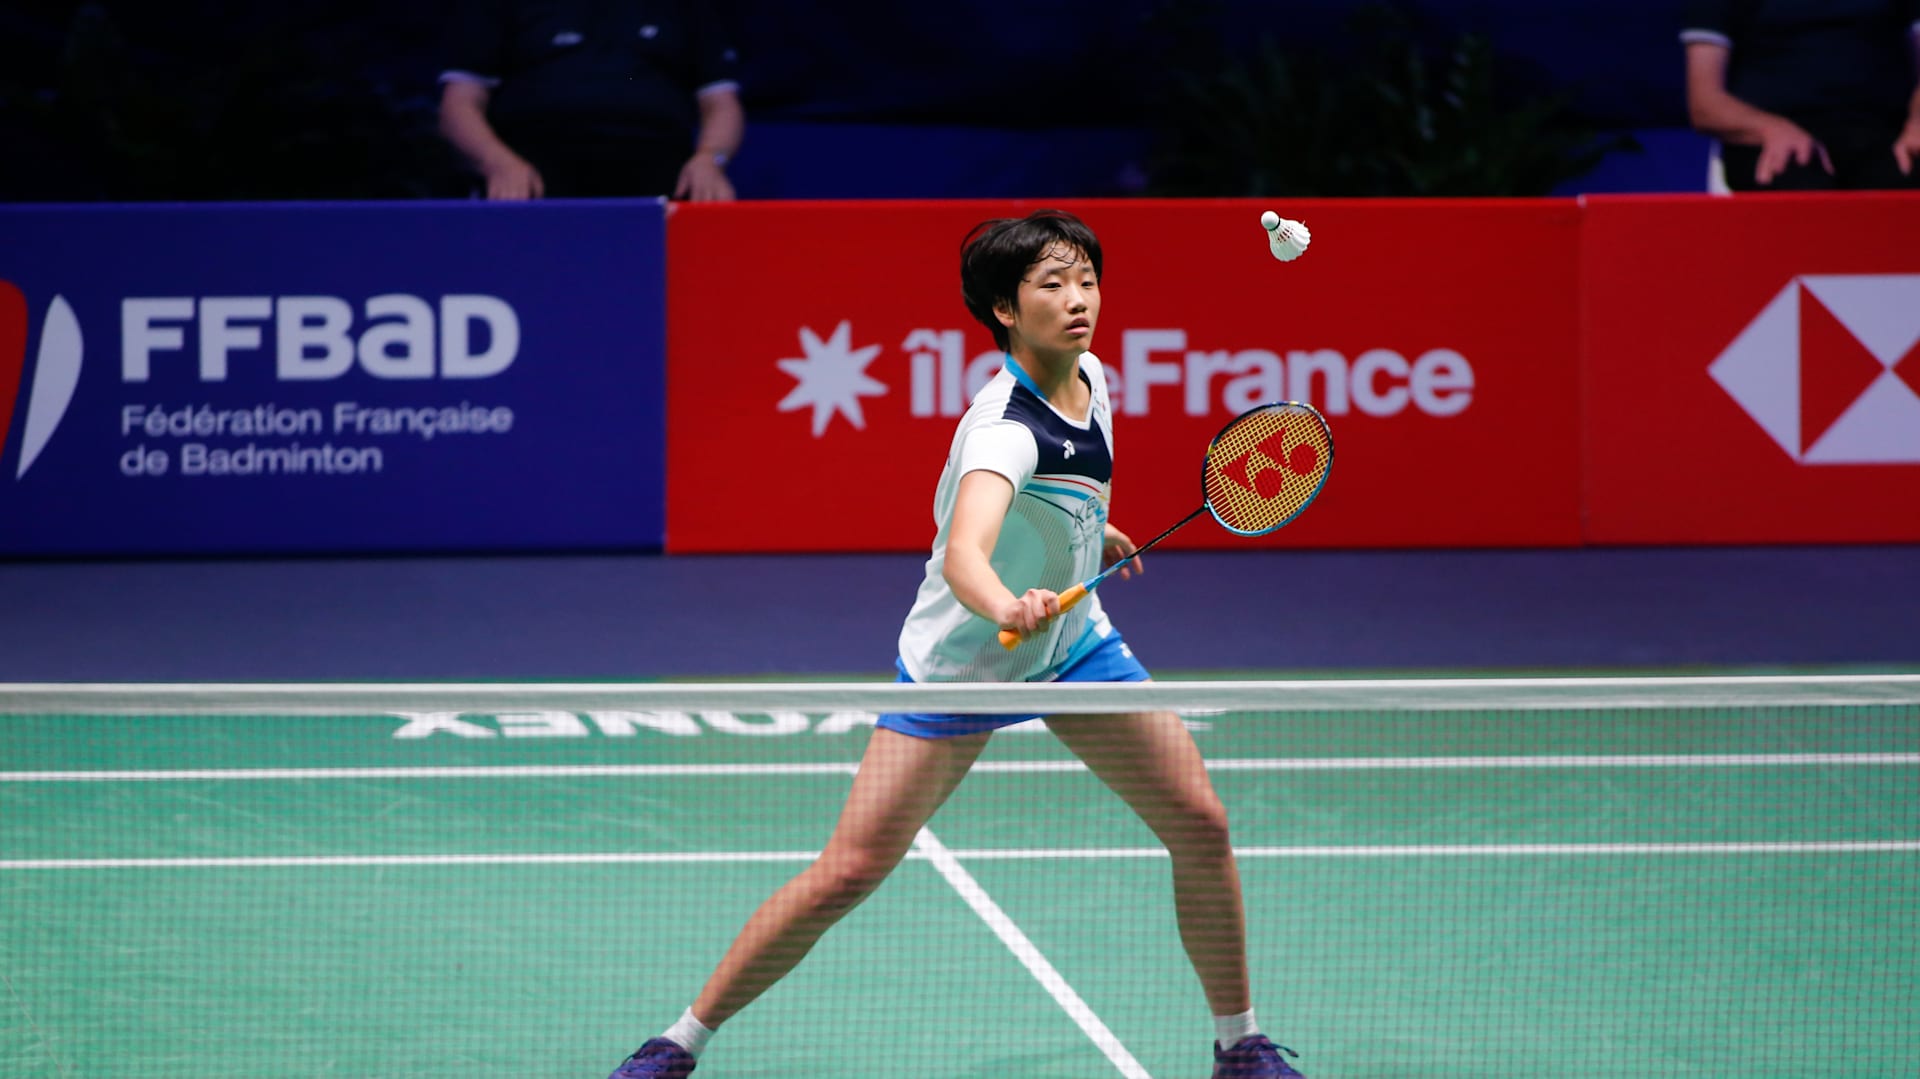 Koreas badminton teen phenom An Se-young on being the youngest player in the national team